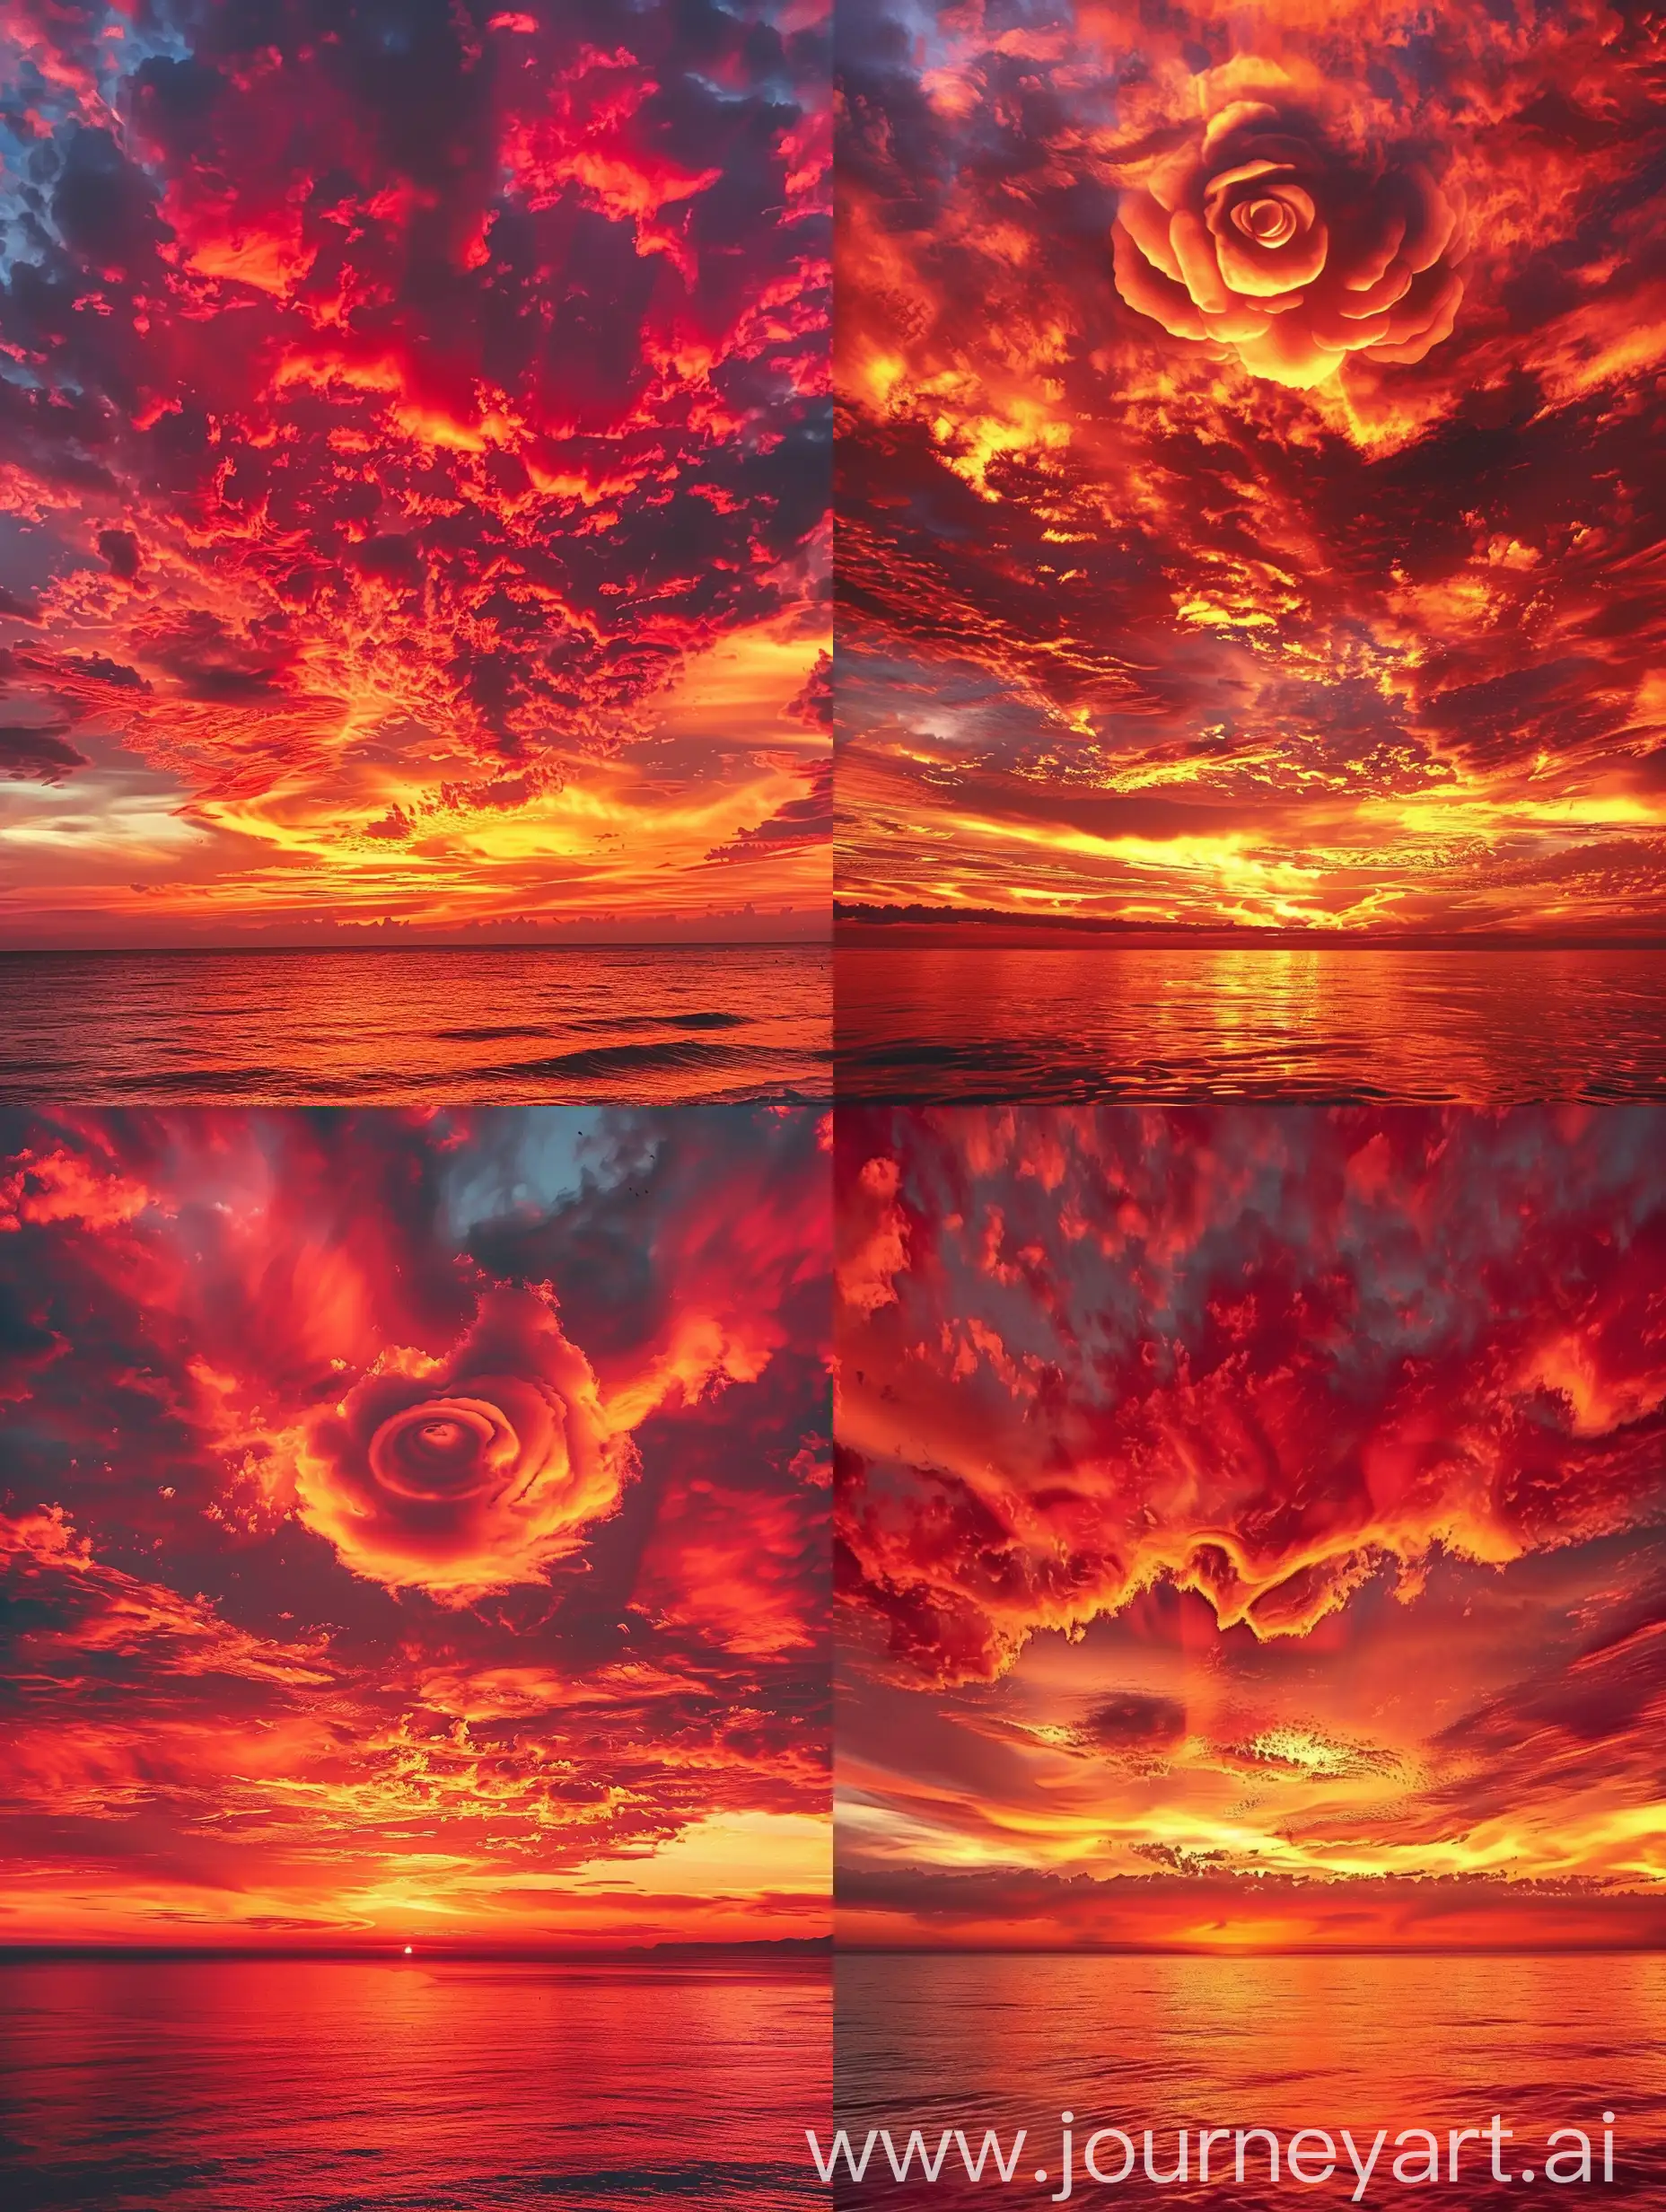  {"prompt":"A sunset sky with vibrant shades of red and orange, where the clouds are forming the shape of a rose. There is a serene ocean below reflecting the fiery colors of the sky. The overall ambiance is dramatic and serene, with the colors creating a sense of warmth and tranquility. The sky is filled with various shades of reds, from deep crimson to bright scarlet, and the ocean carries hints of these colors in its reflection.","size":"1024x1024"}
